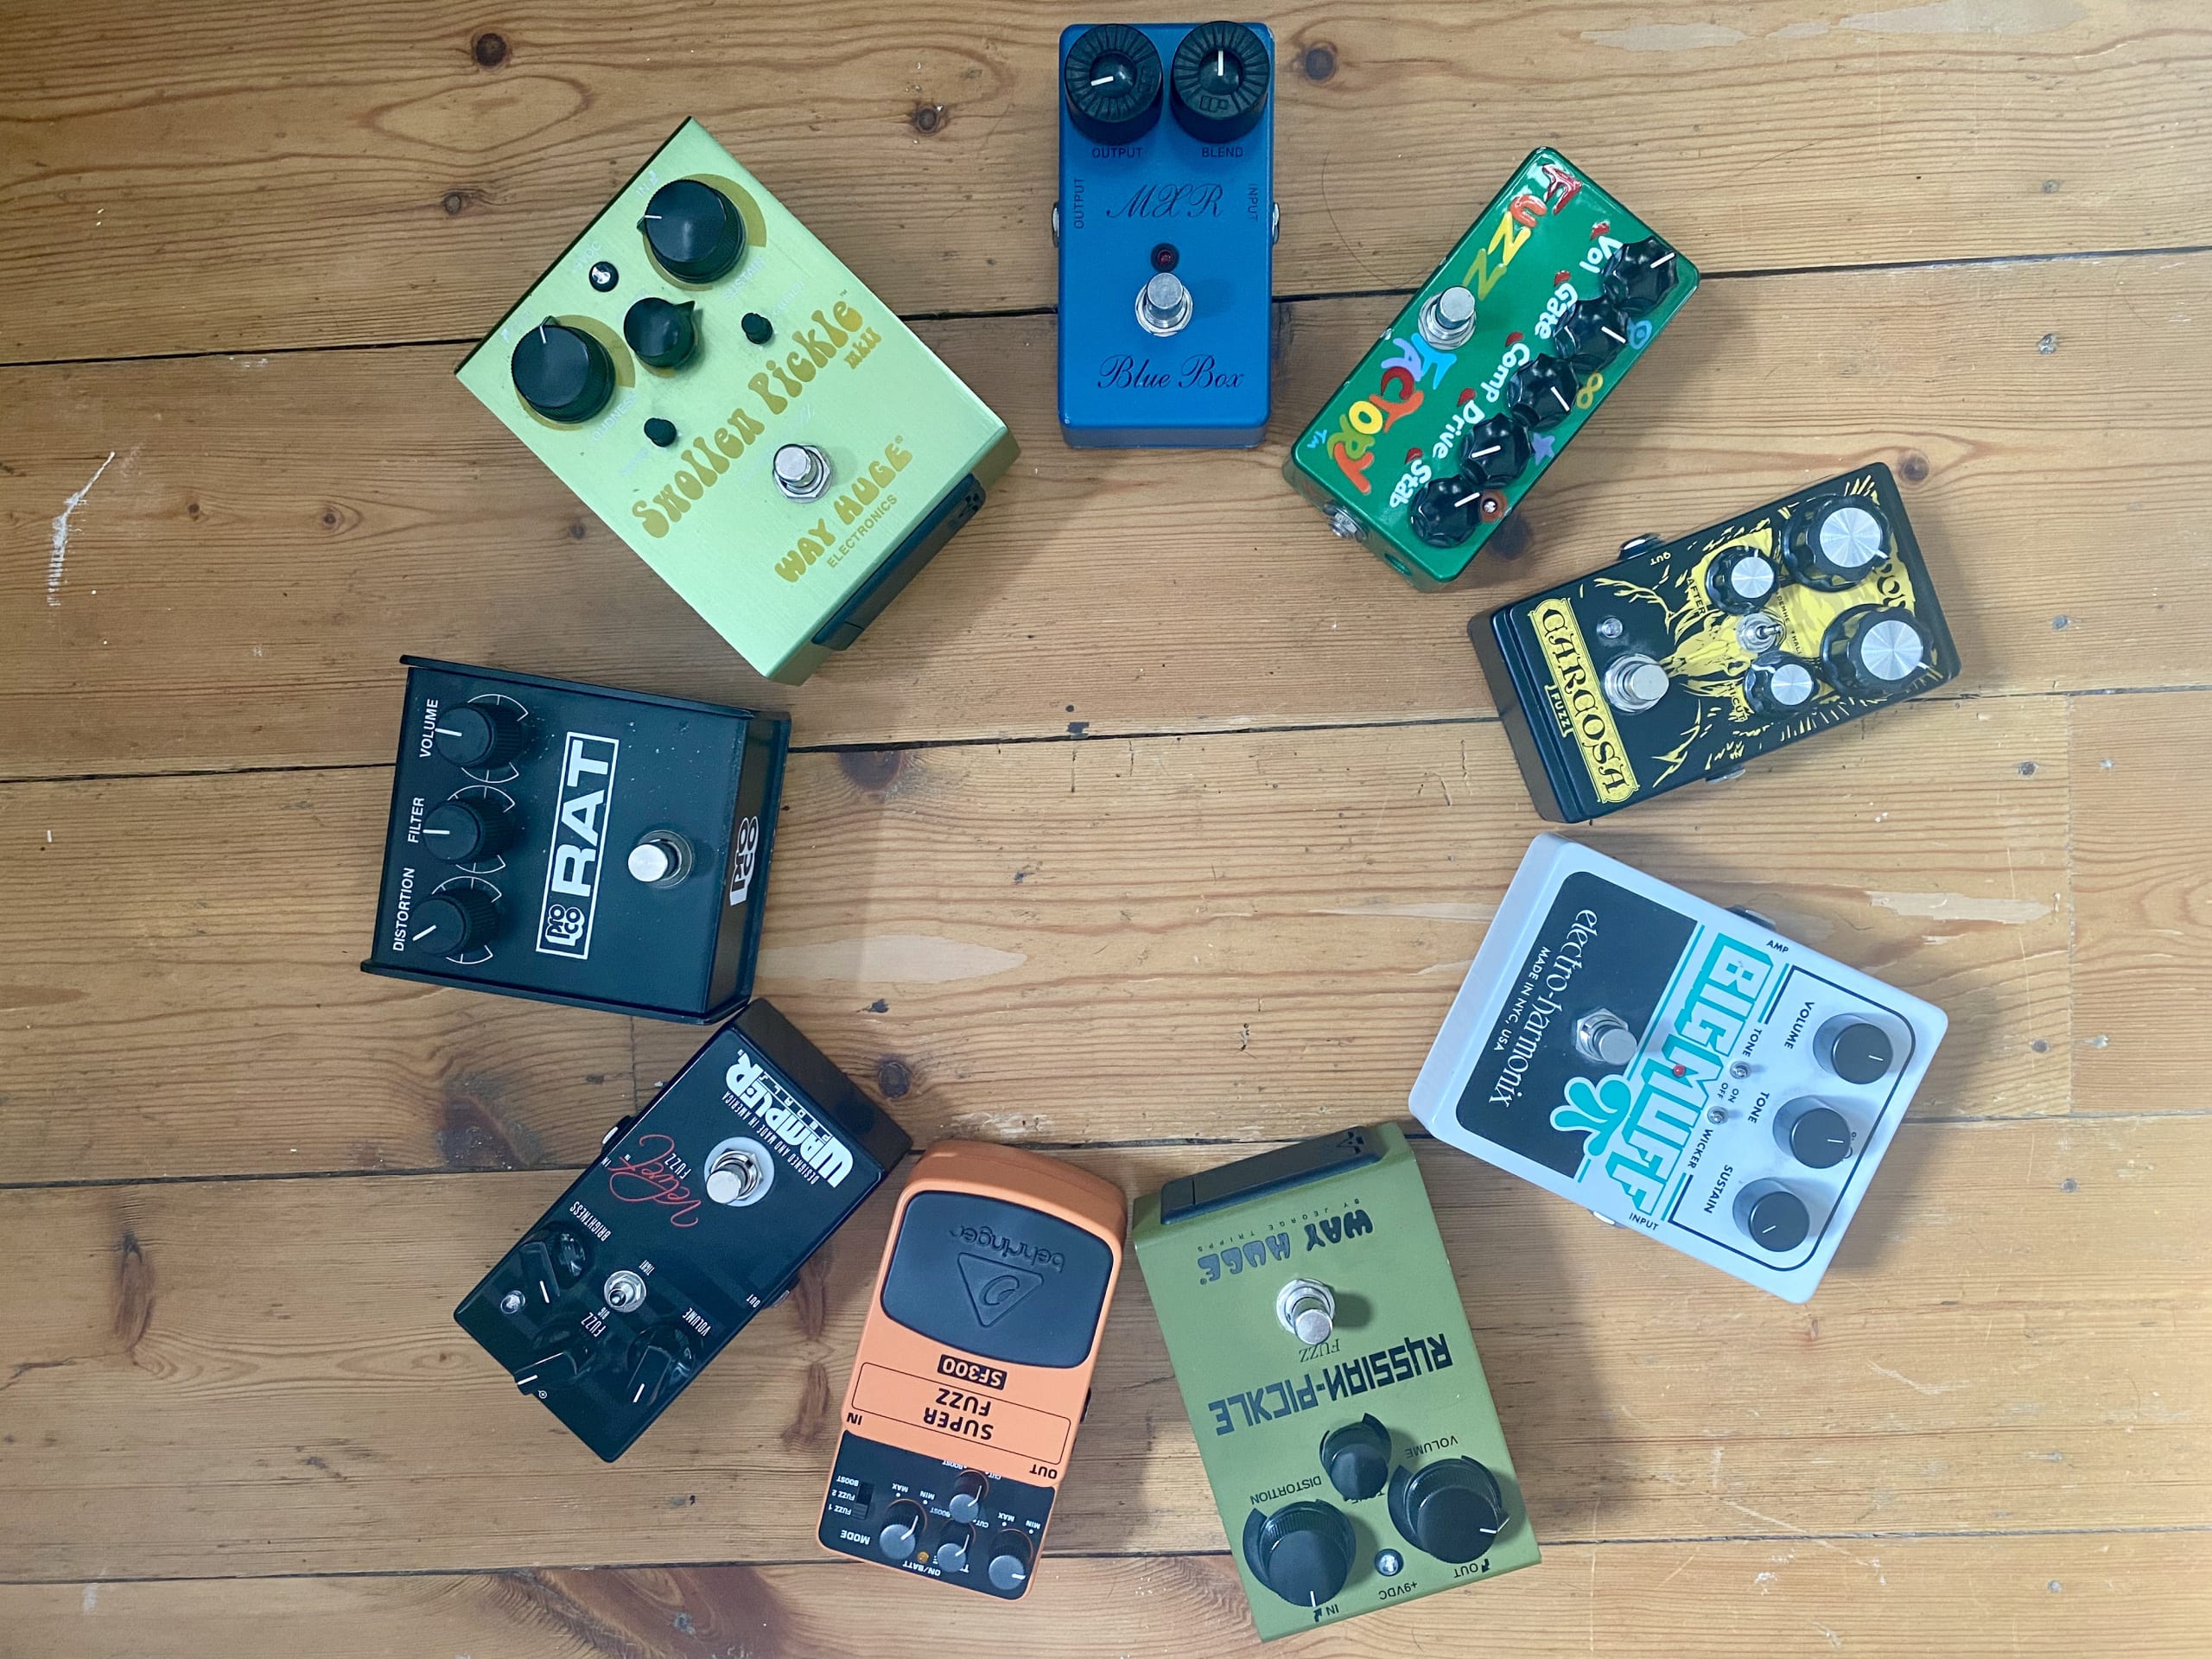 Some of my favourite fuzz boxes